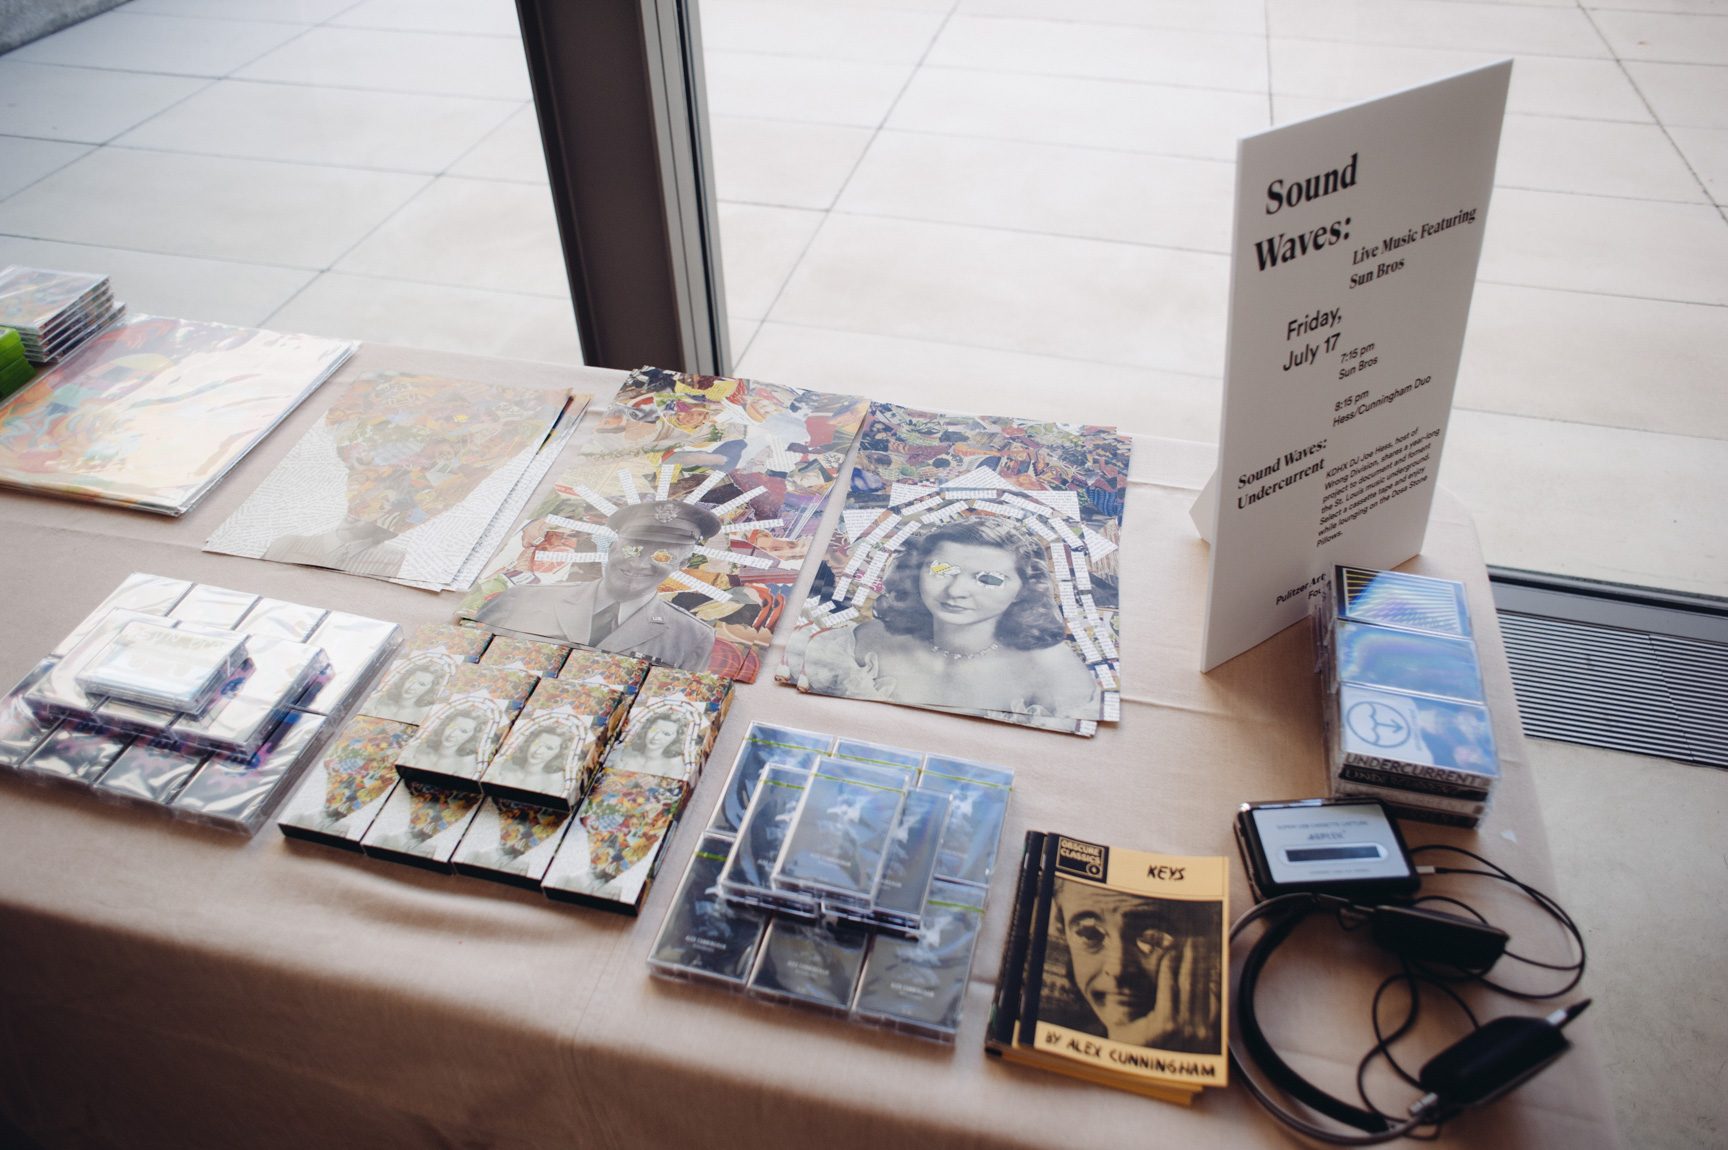 A table next to the Water Court windows covered with posters and cassettes from the musical acts.